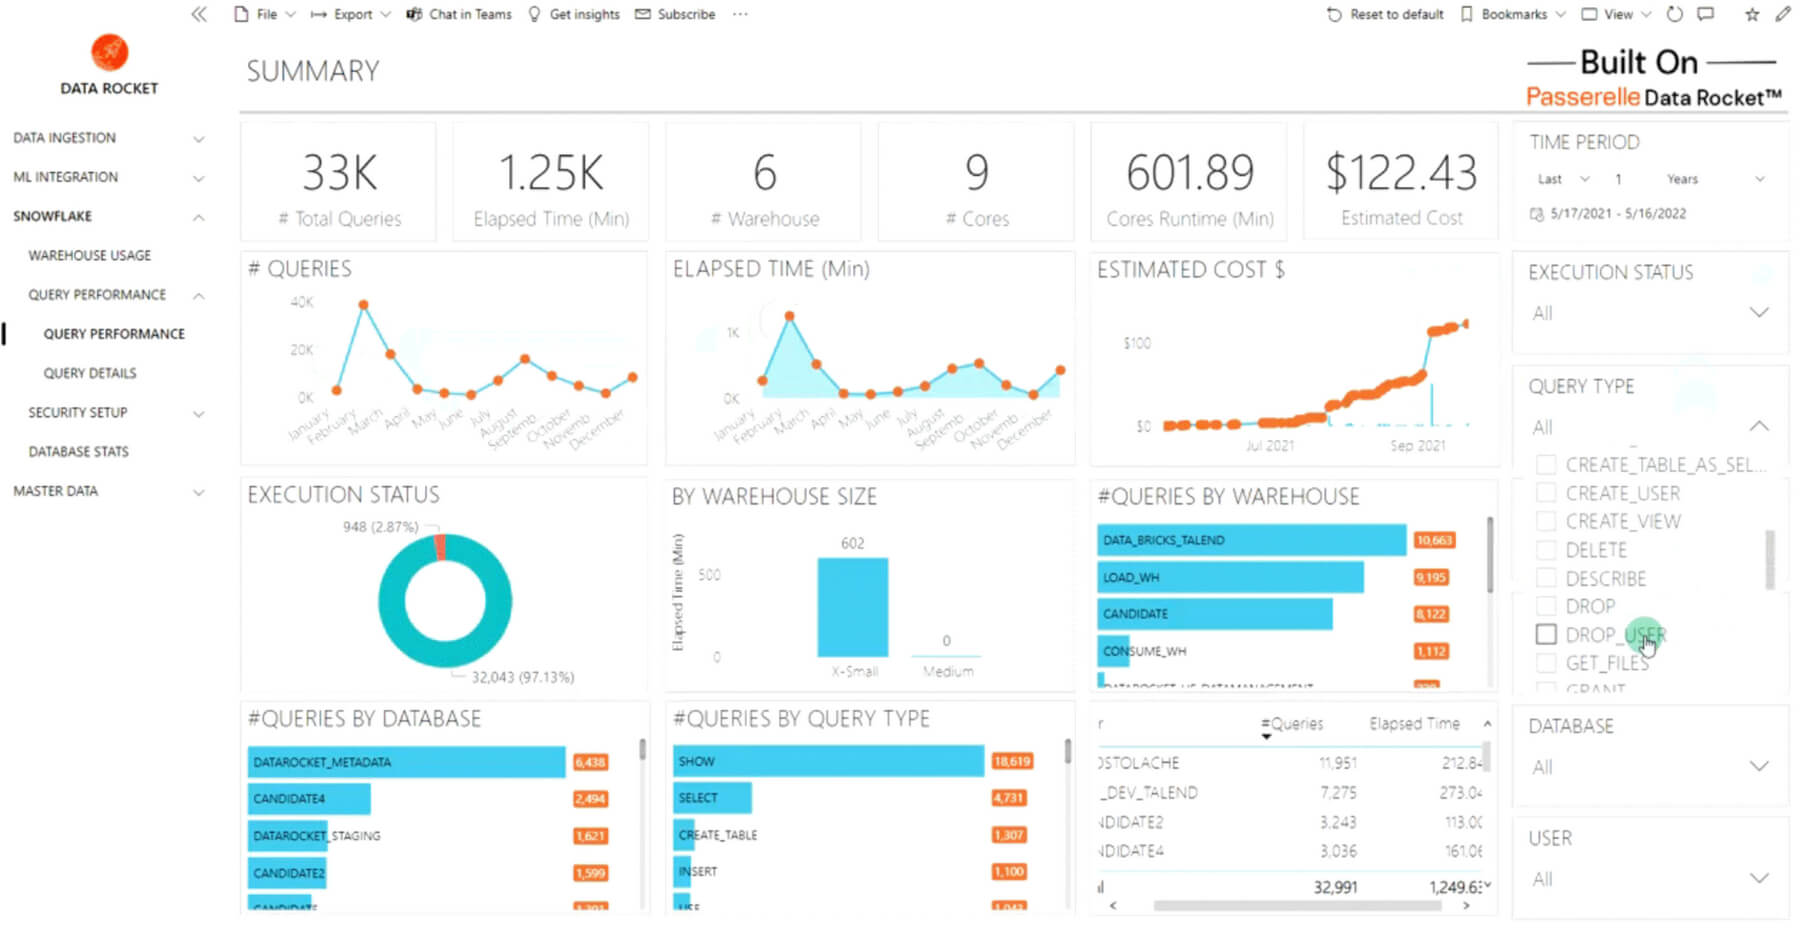 Dashboards for technical stakeholders with information related to database performance details